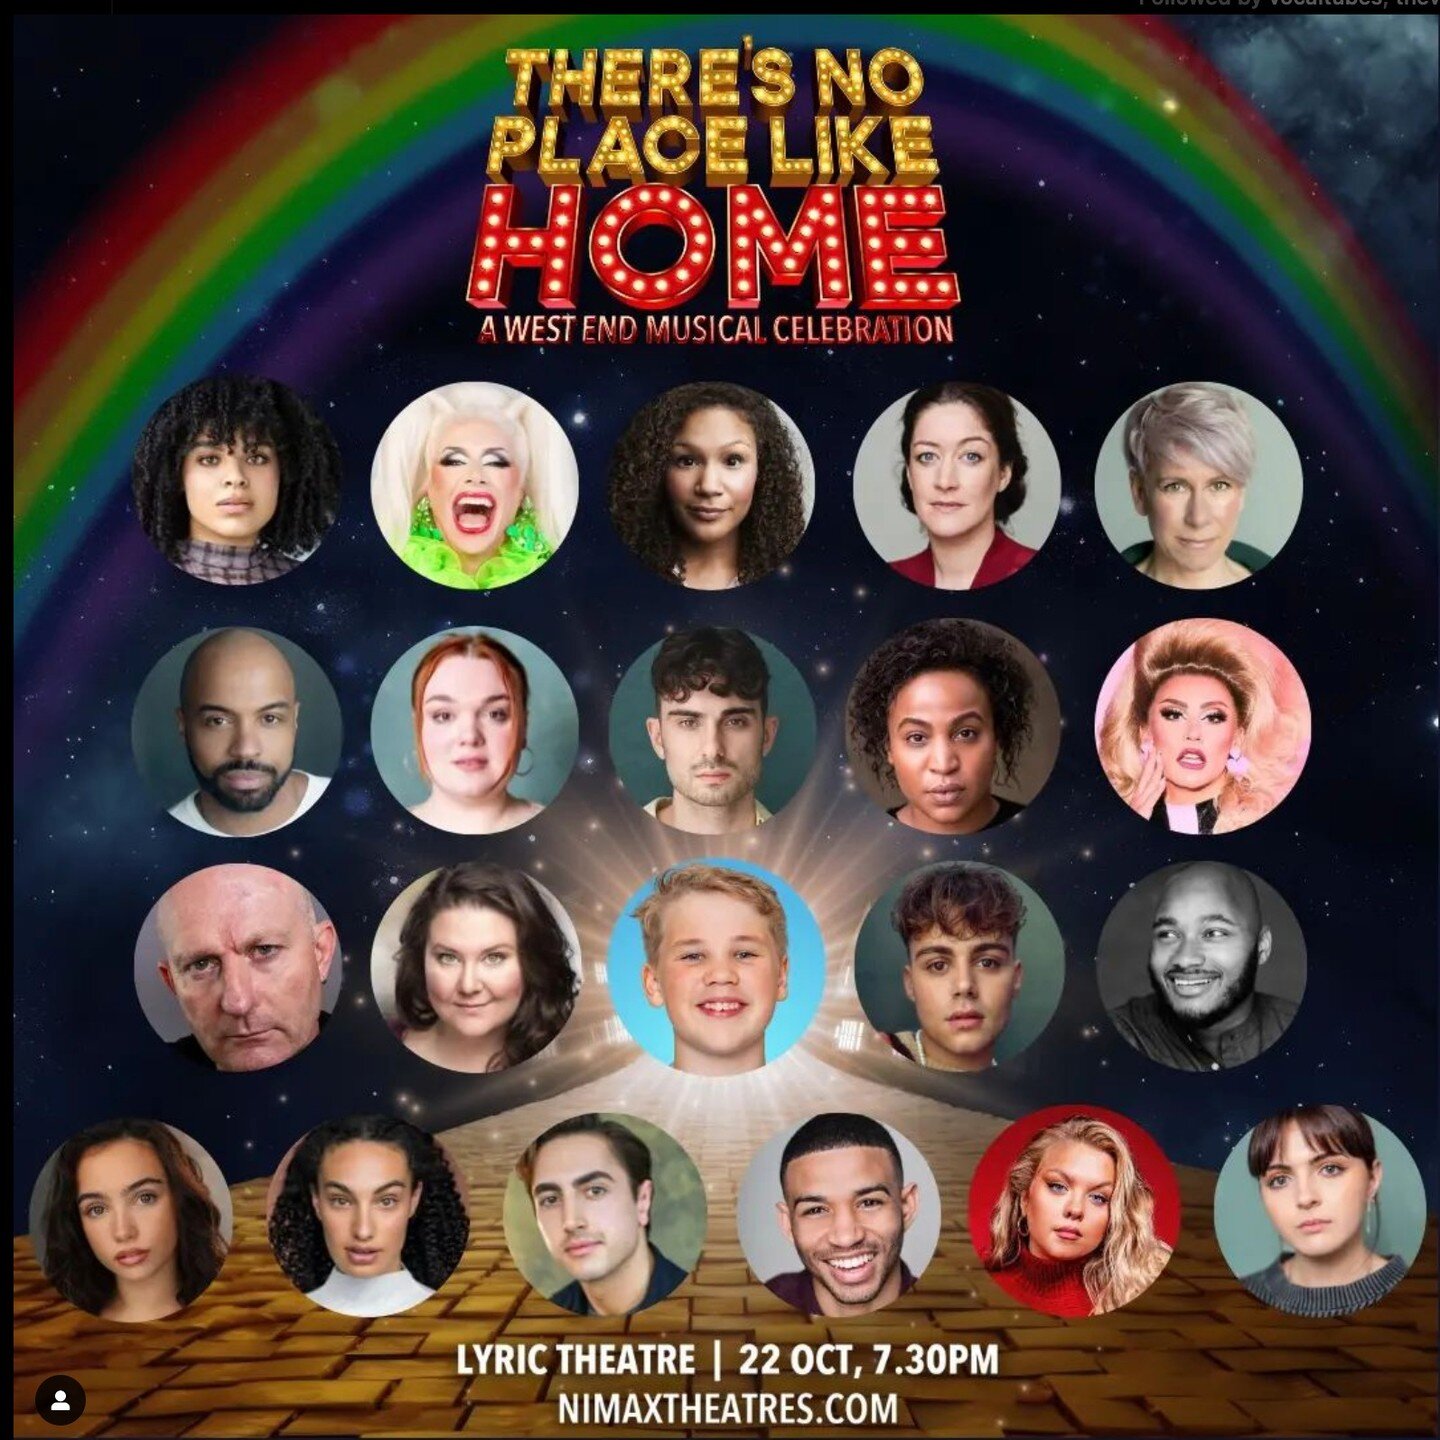 So excited to be performing on Sunday with @thesingspace choir for the launch of this incredibly important new charity! 

#cheerupcharlie #antibullying #westend 

Come and join us! 

Tickets:
https://www.whatsonstage.com/shows/london-theatre/west-end